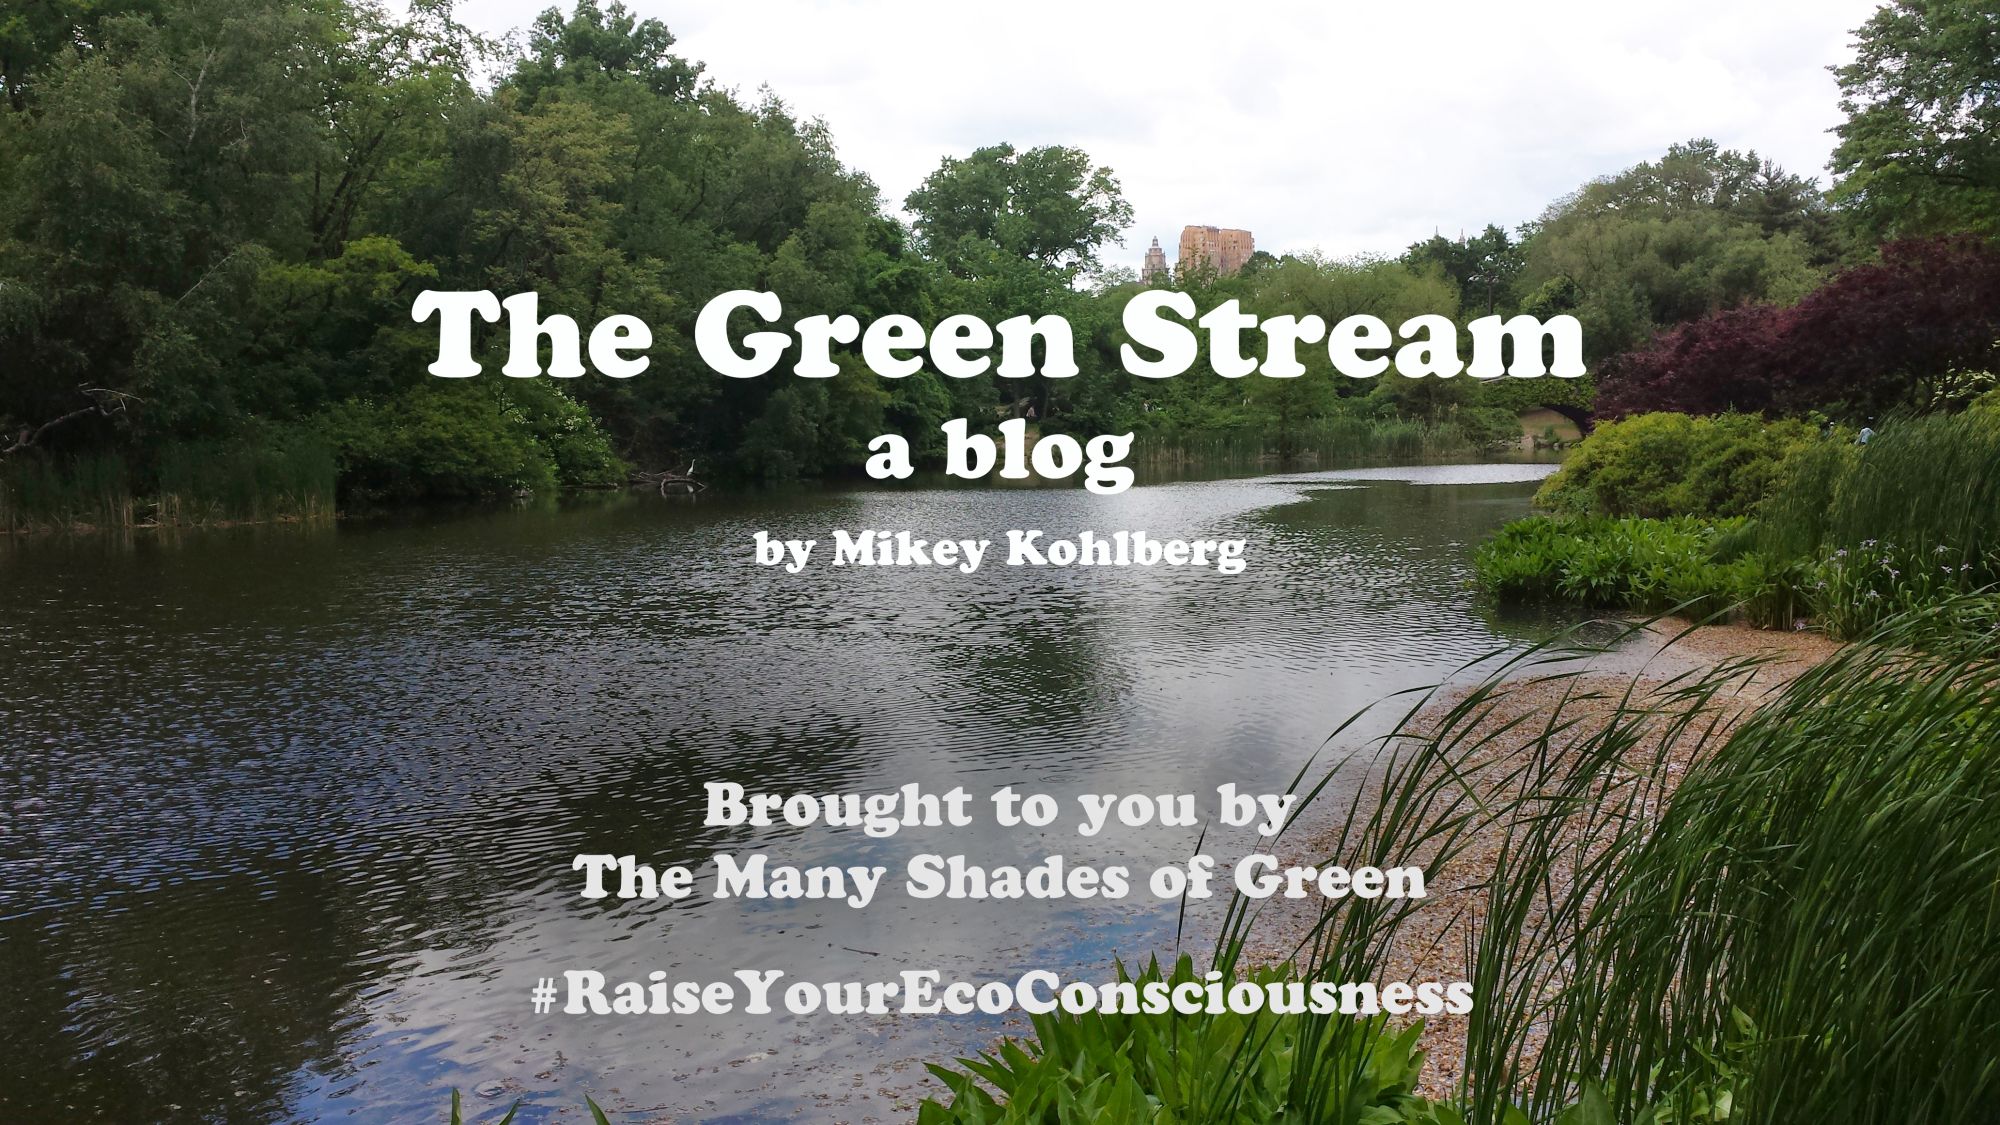 The Green Stream: Welcome to The Green Stream